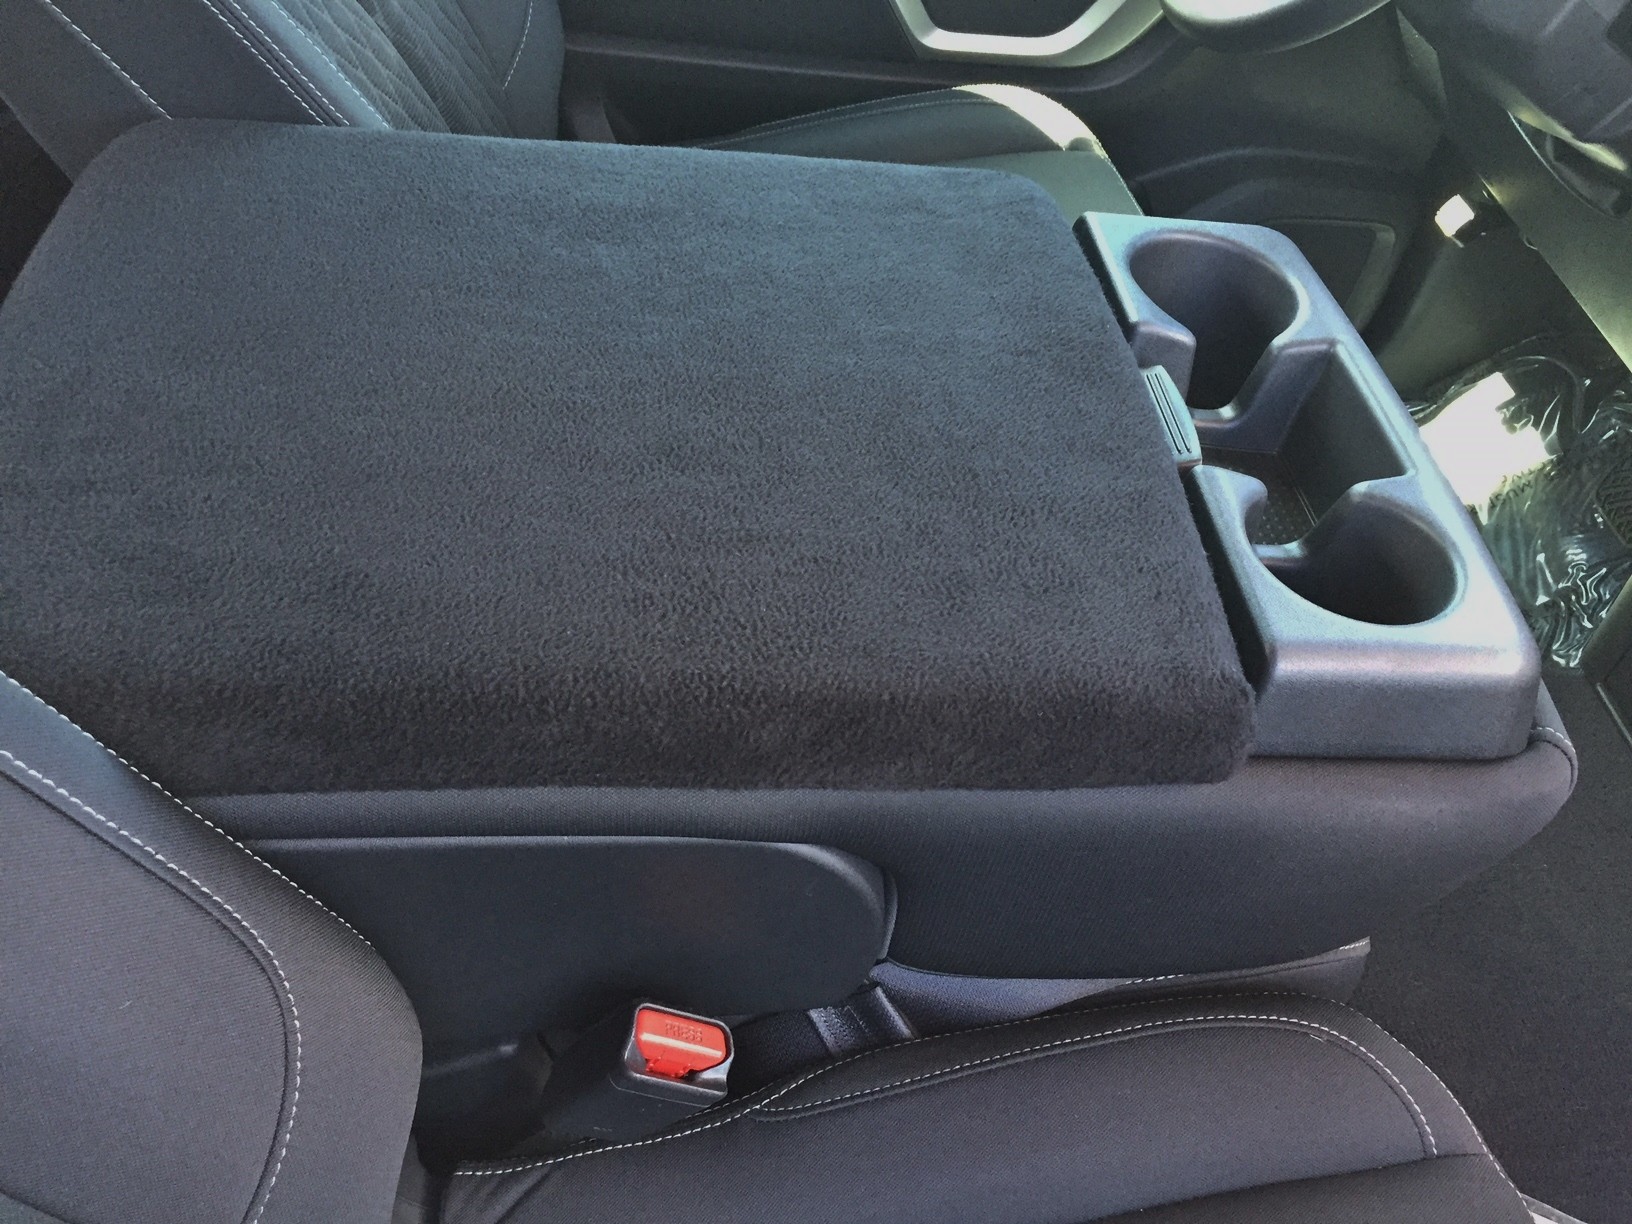 Buy Fleece Center Console Armrest Cover Fits the Nissan Titan 2014-2021 (With Front Middle Seat)